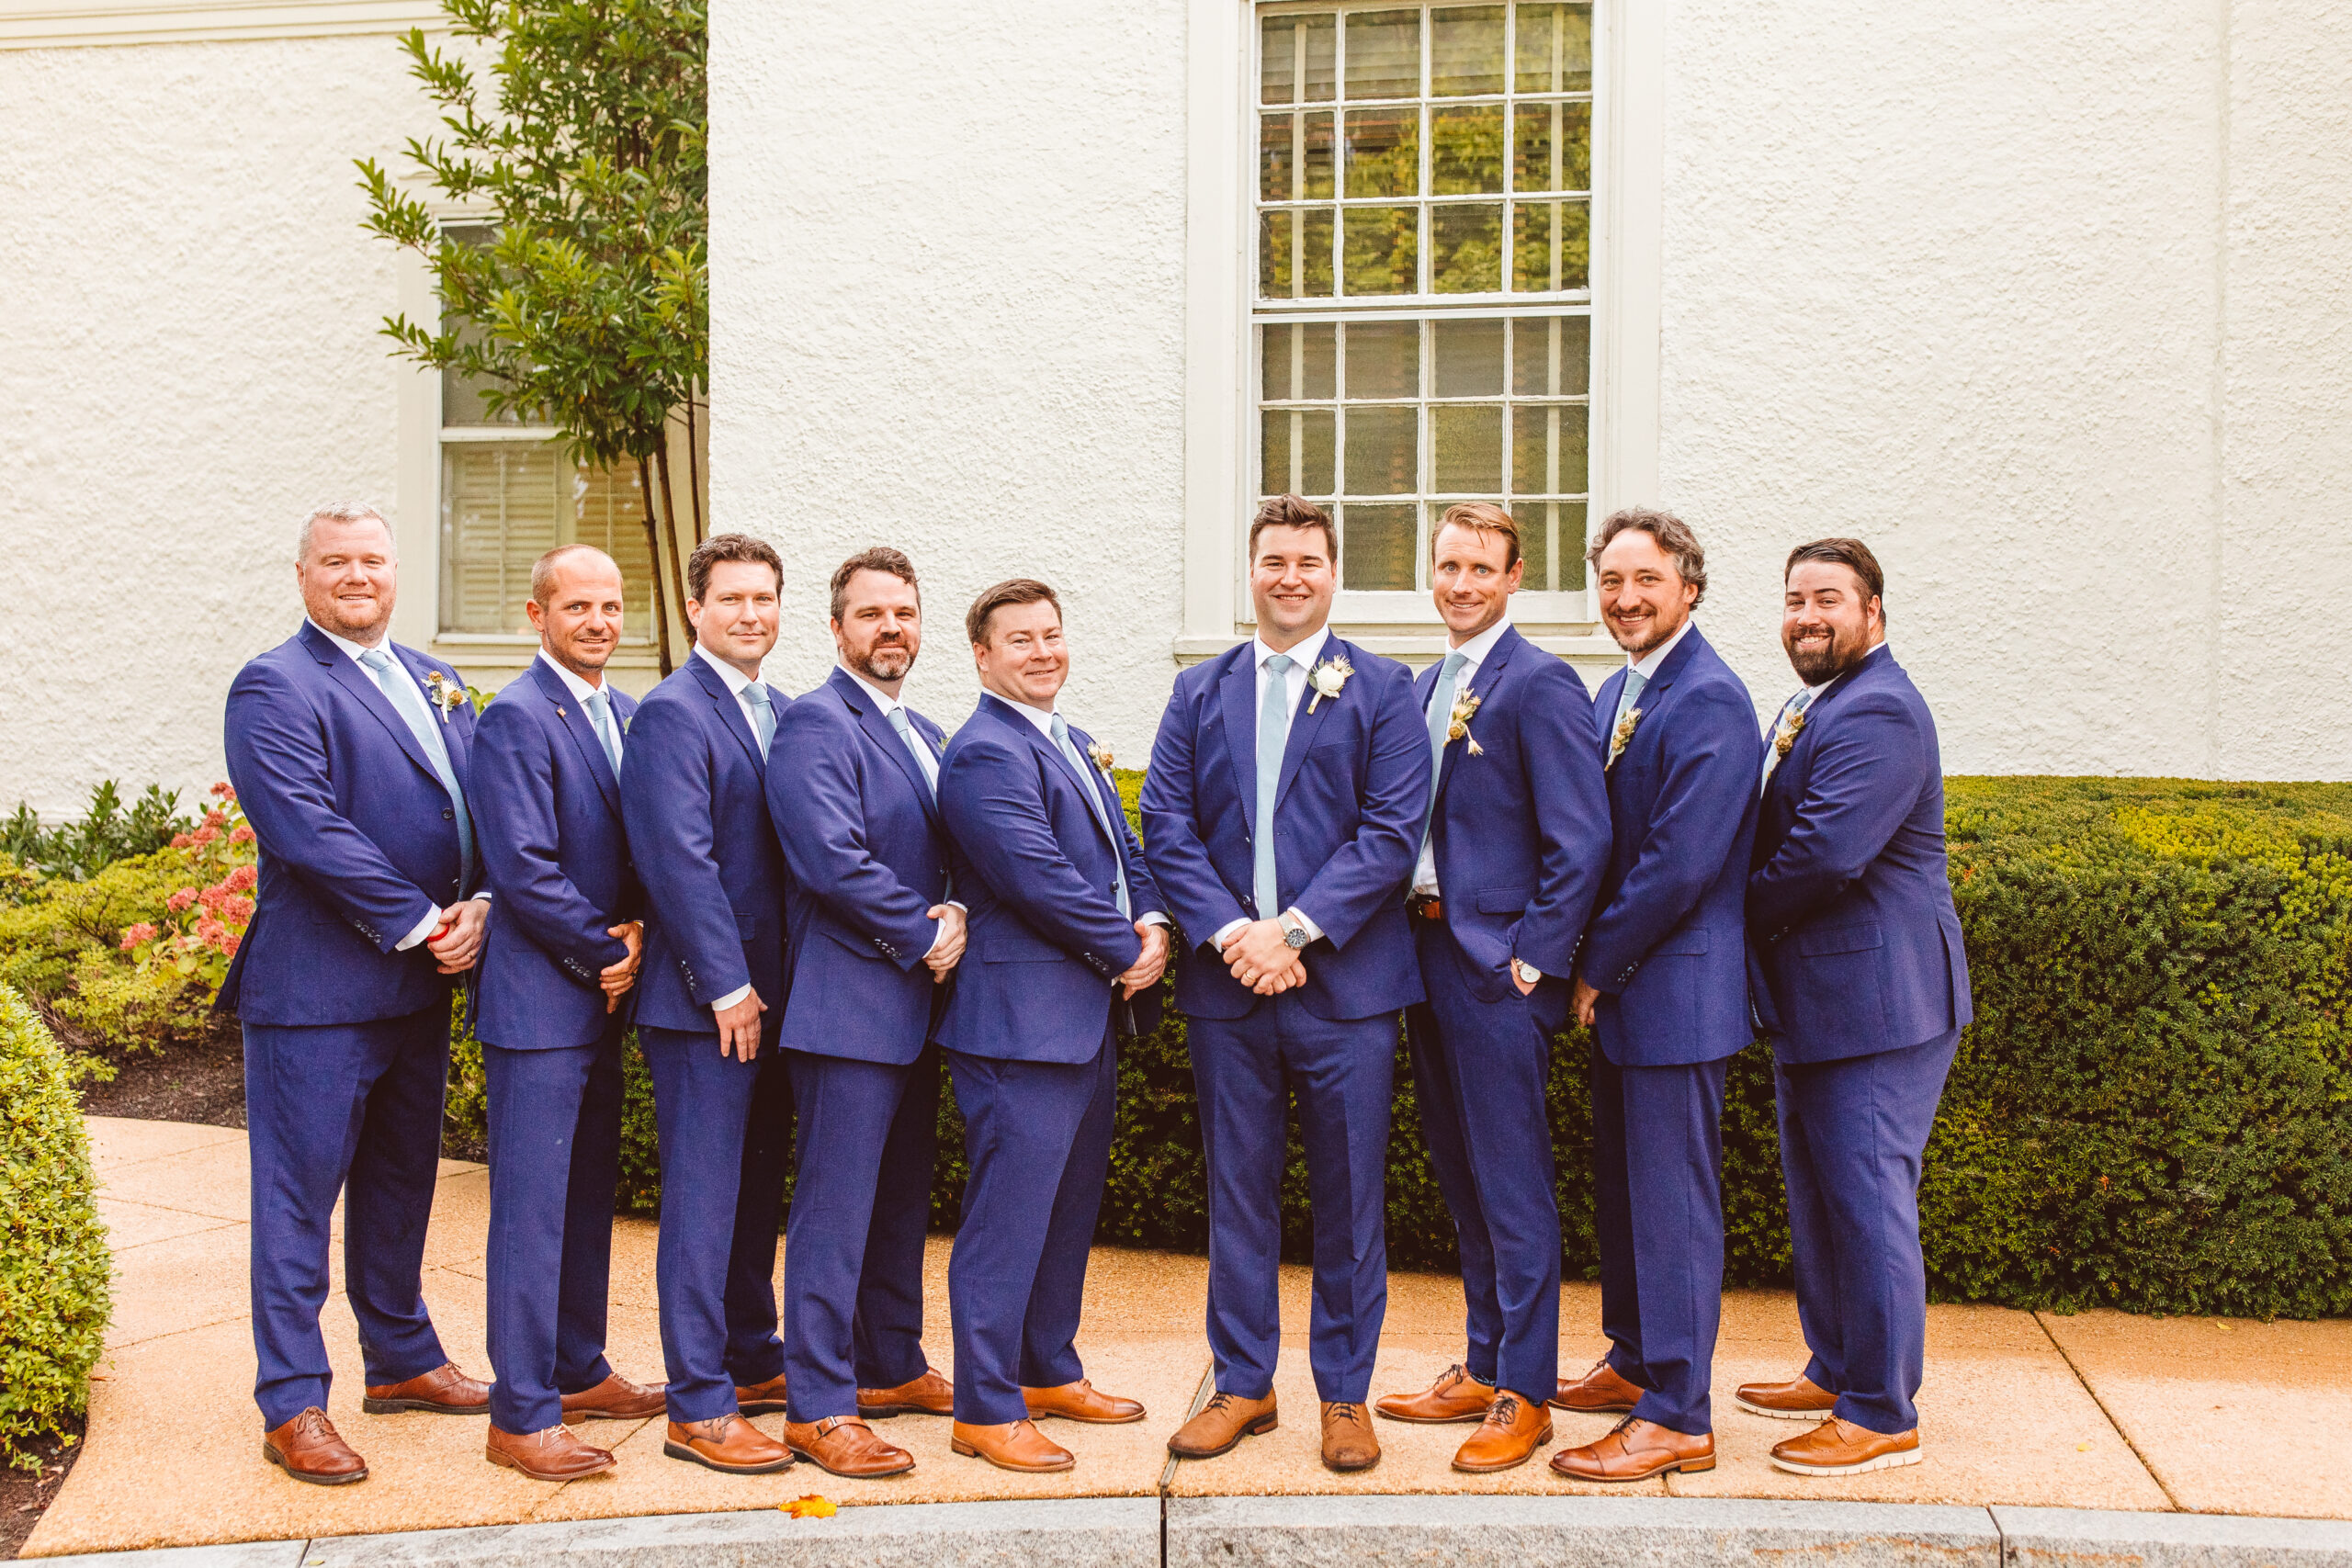 Groom and groomsmen photos from country club wedding captured by Charlotte wedding photography Brooke Michelle Photo